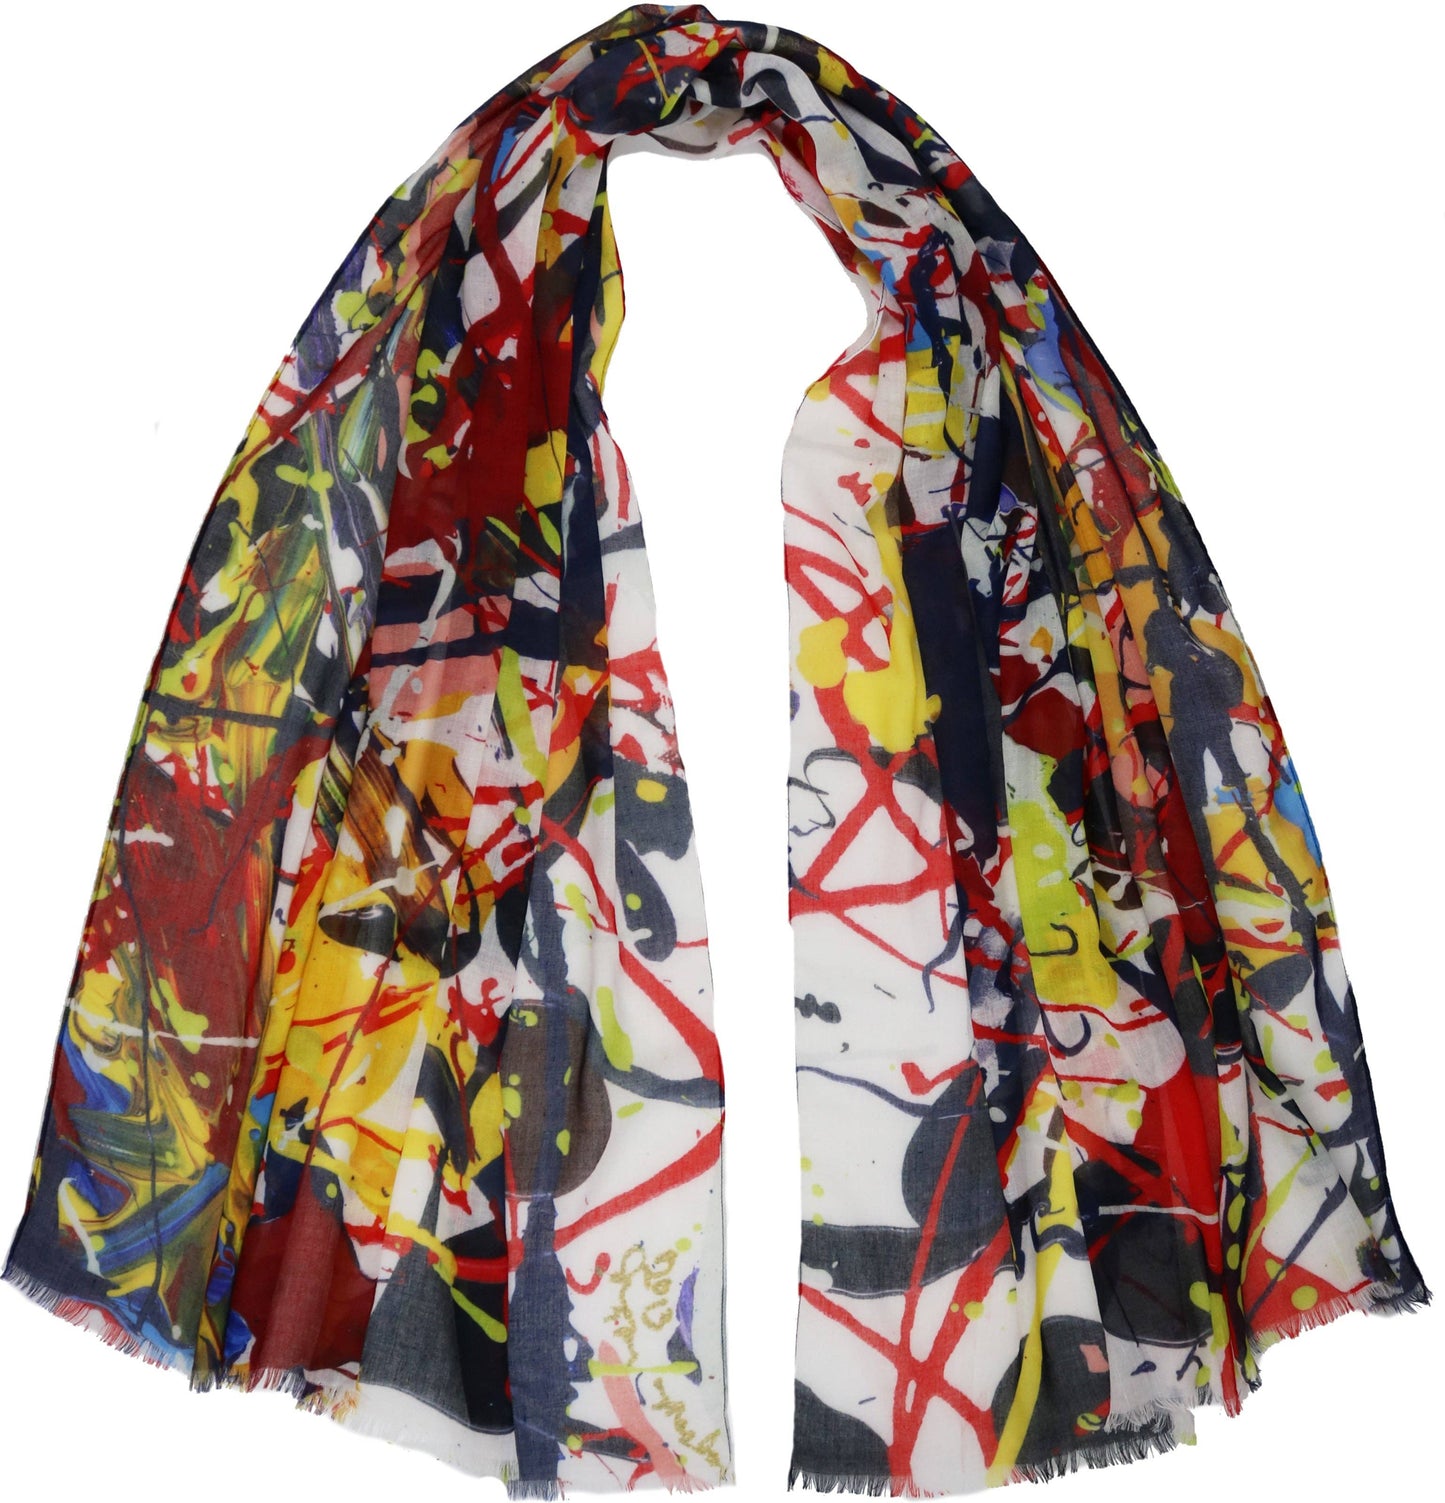 FRAAS - The Scarf Company - Jumper Maybach X FRAAS "Taffy Balloon Madness" Recycled Polyester Scarf